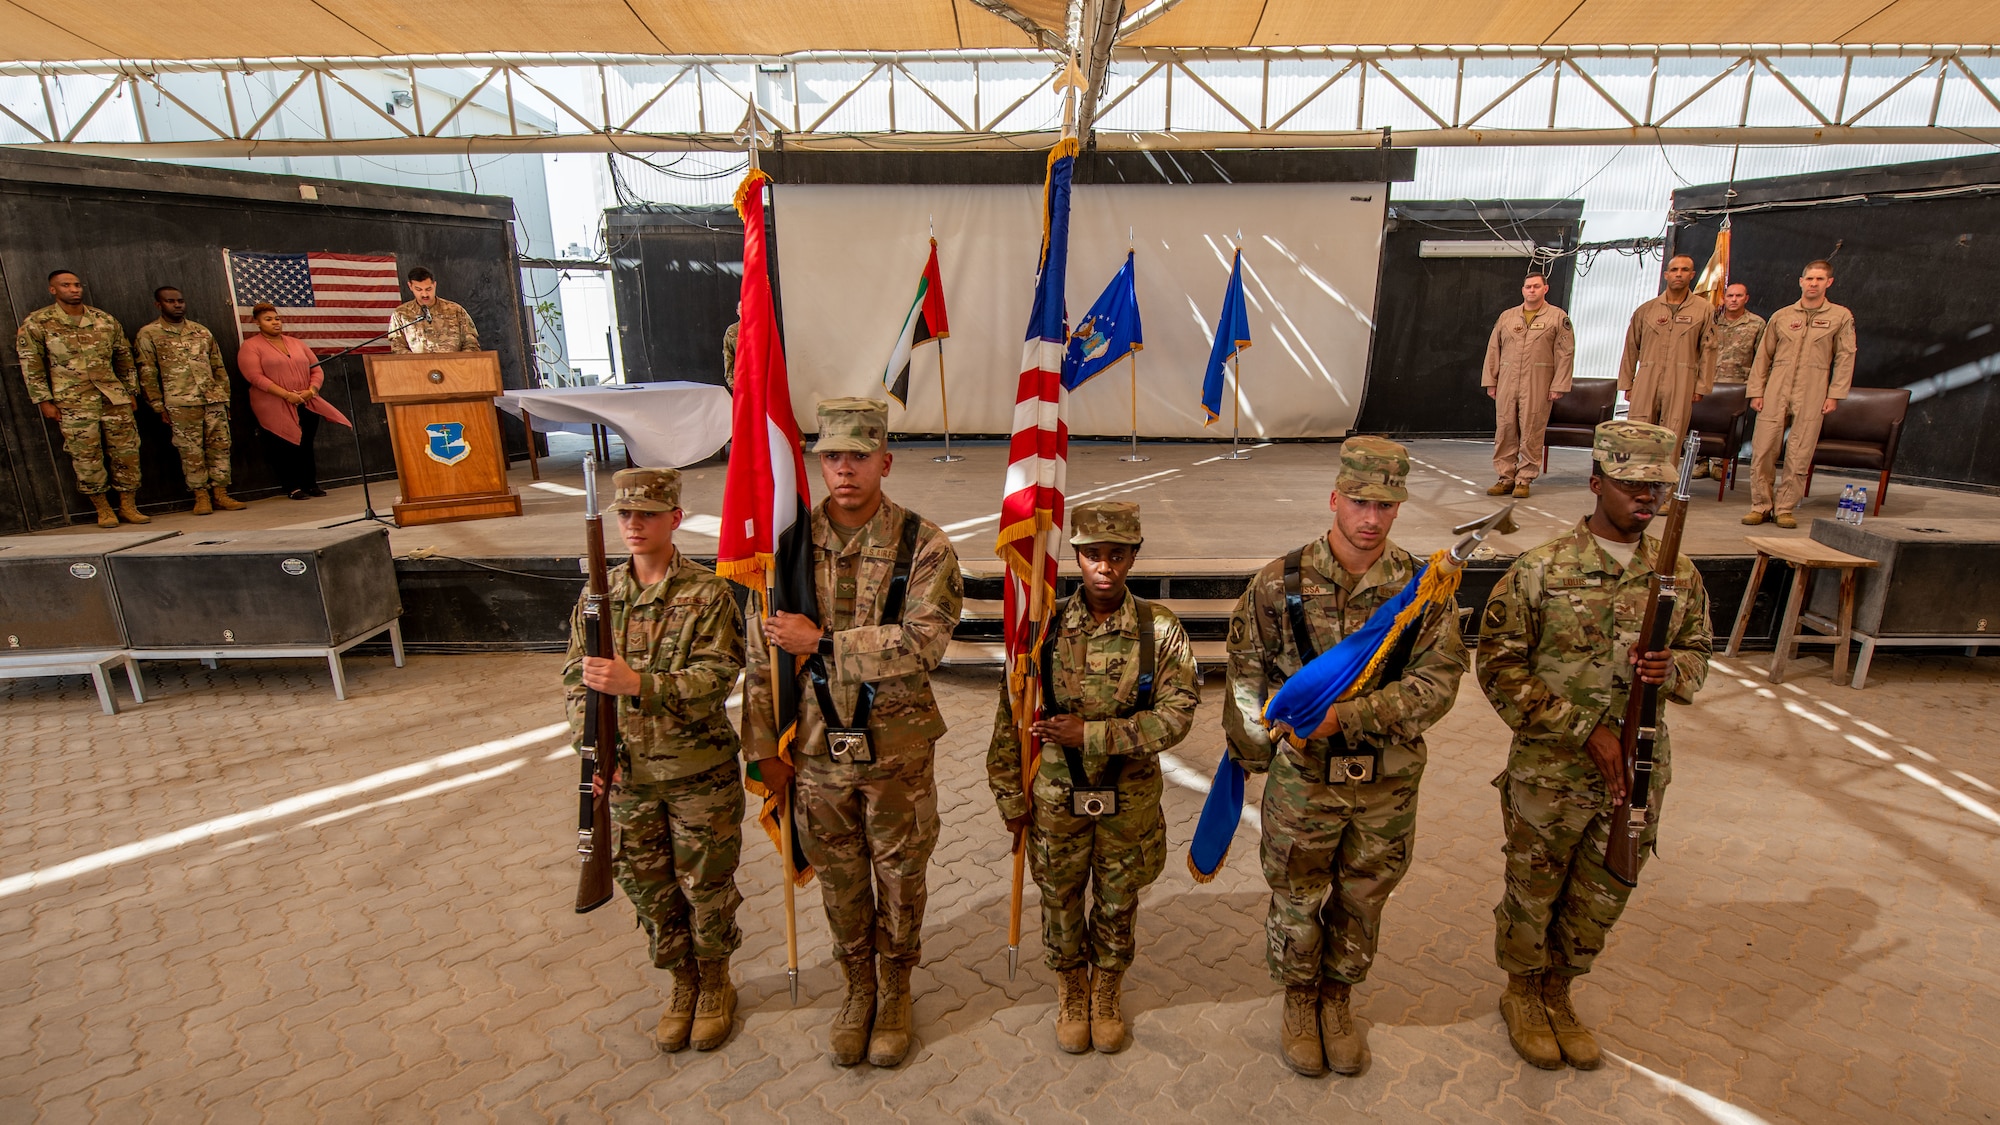 The 380th Air Expeditionary Wing Honor Guard presents the colors during the change of command ceremony July 1, 2019, at Al Dhafra Air Base, United Arab Emirates.